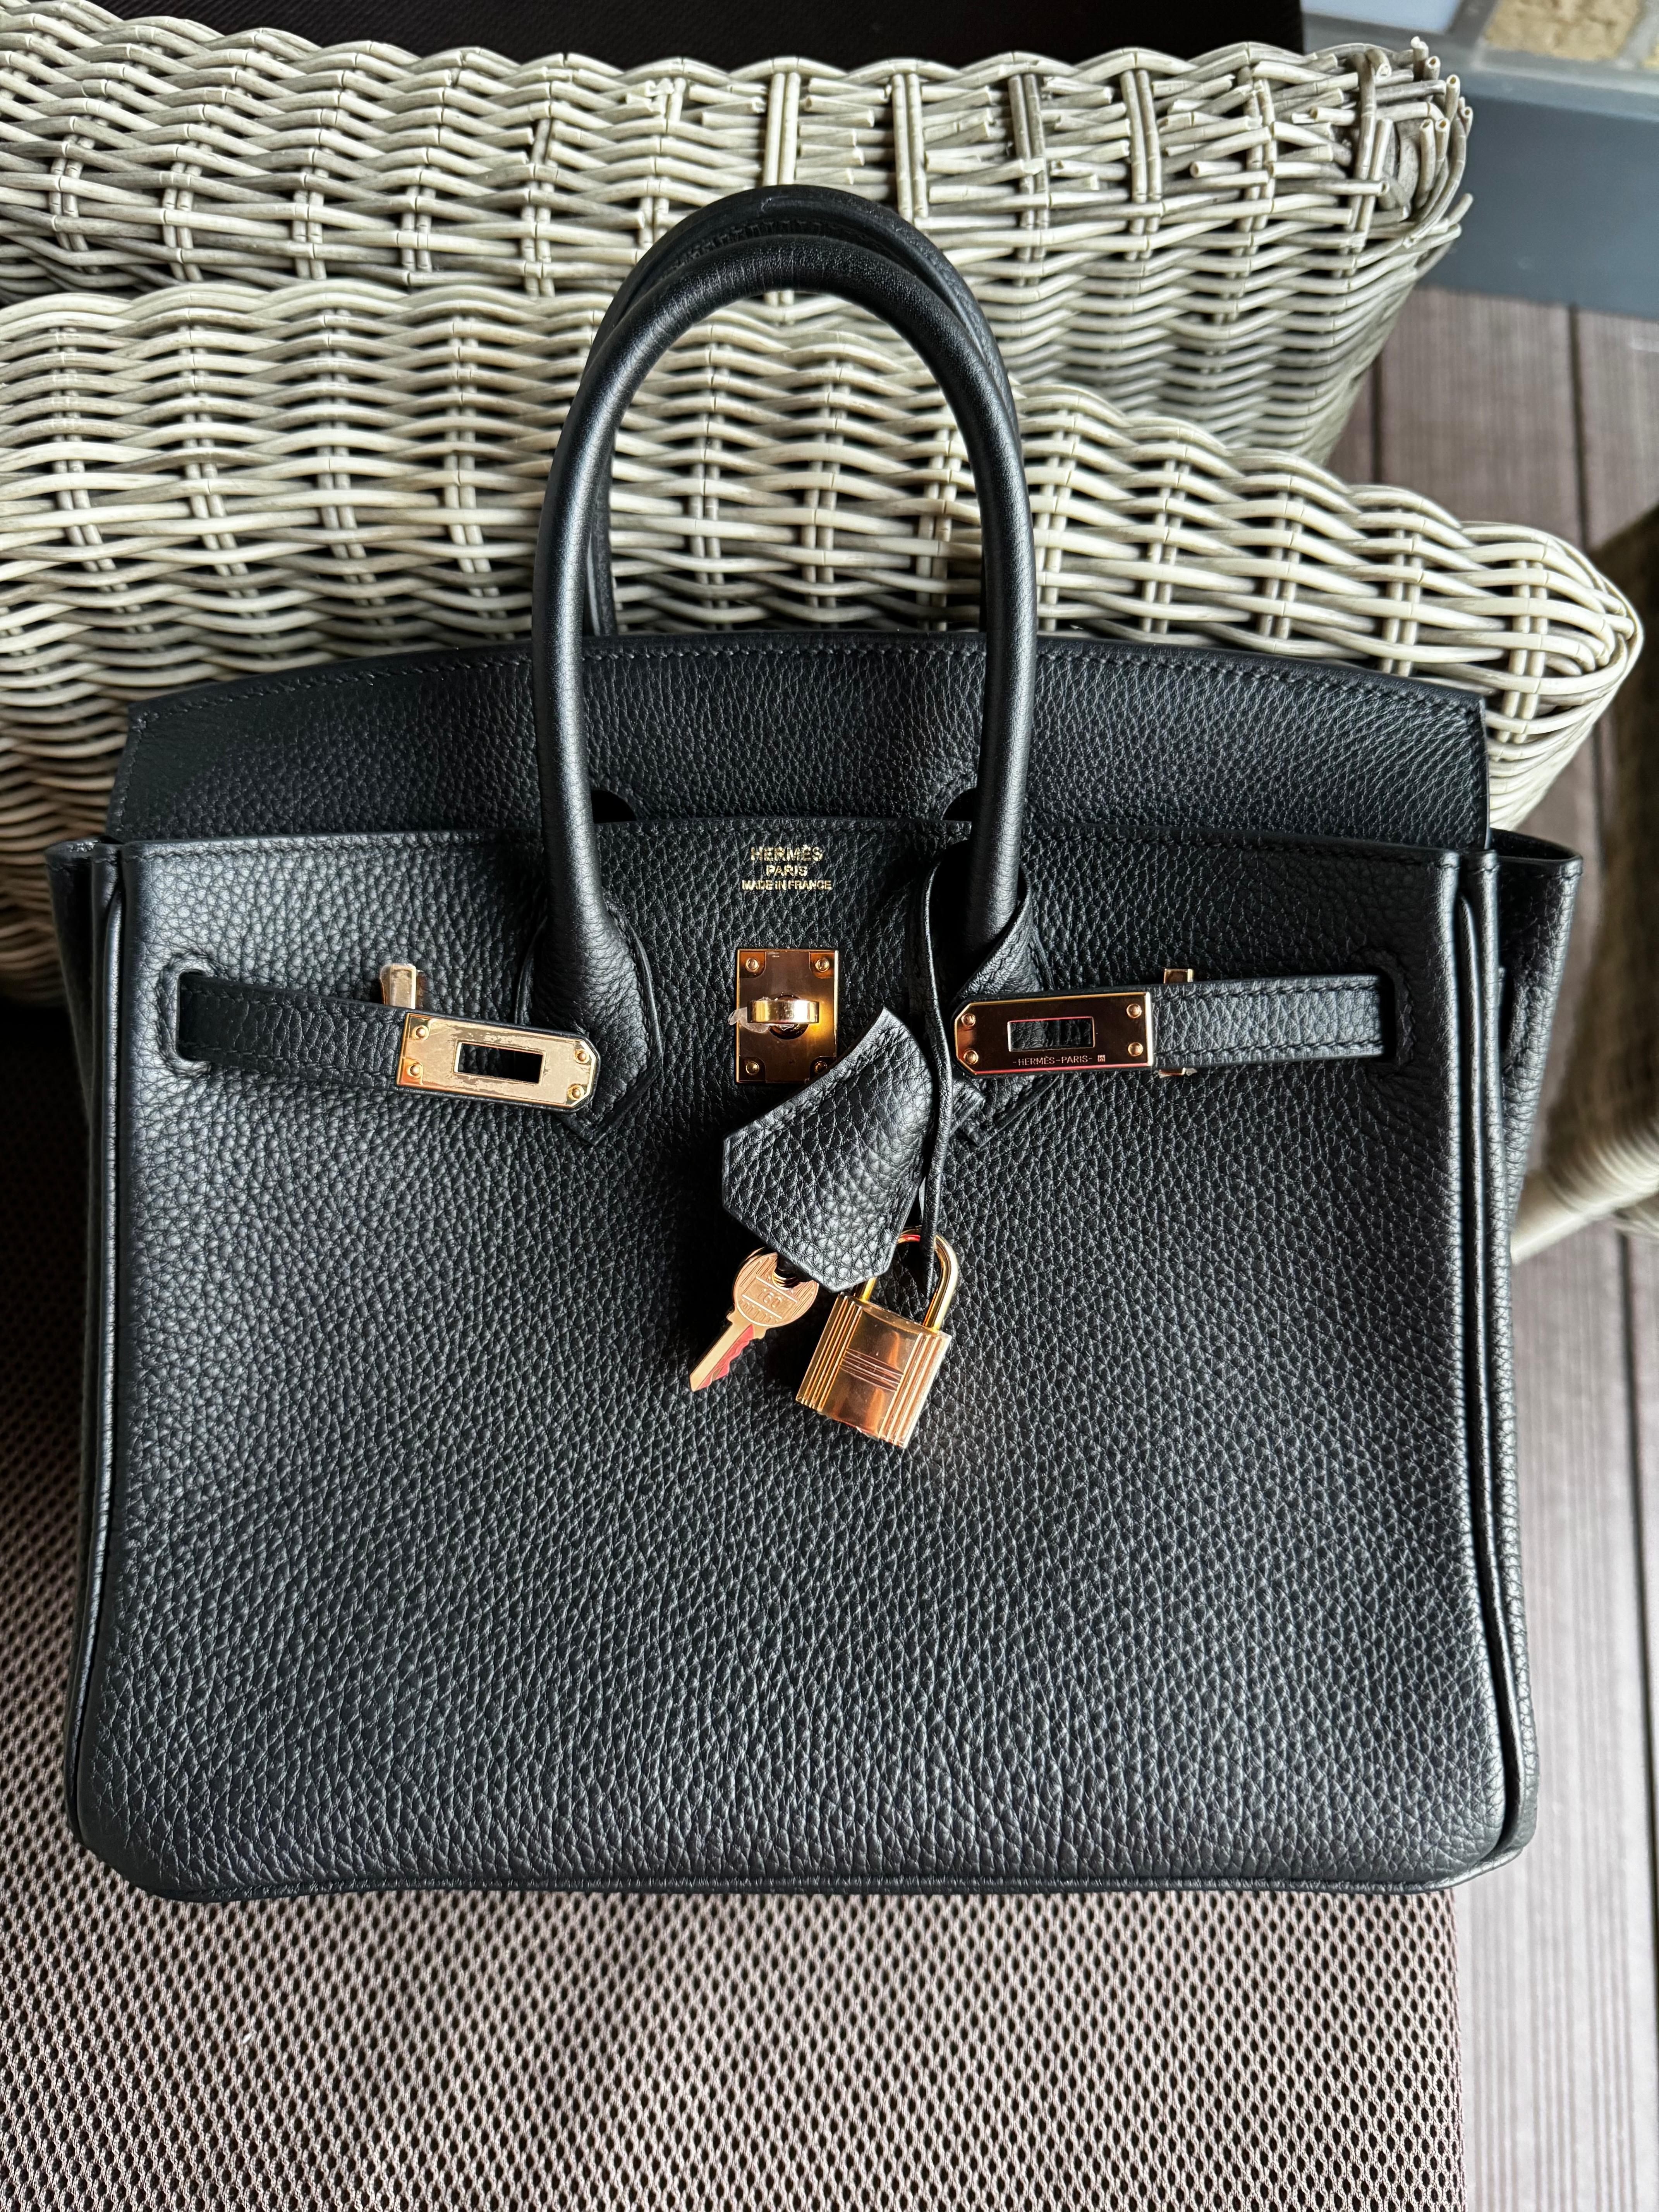 Hermes Birkin 25 Black togo rose gold hardware handbag. One of the most classic bags, timeless! 

Comes with dustbag and box. Z stamp, most stickers on, excellent condition.